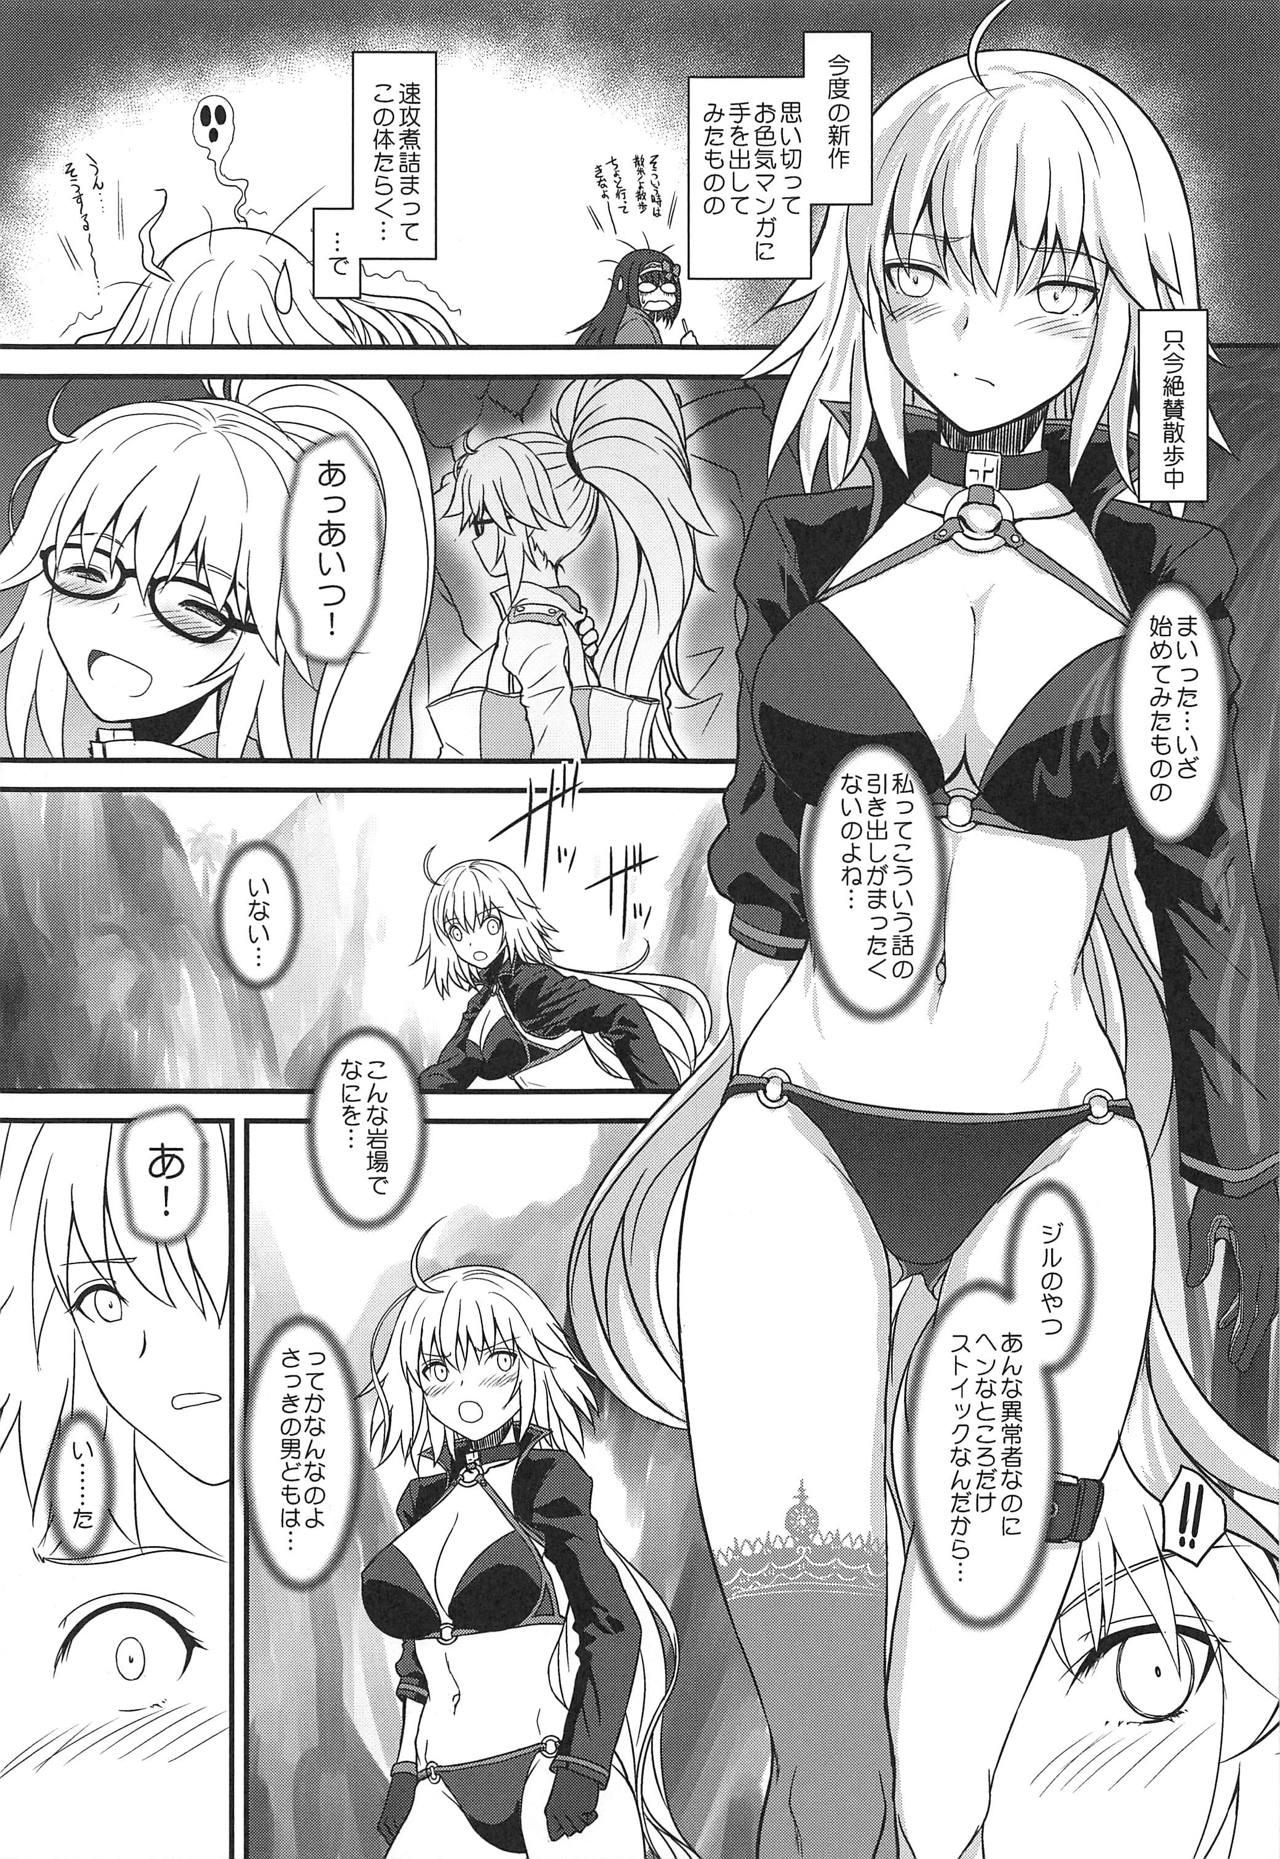 Young Tits Am i Evil? - Fate grand order Whores - Page 4